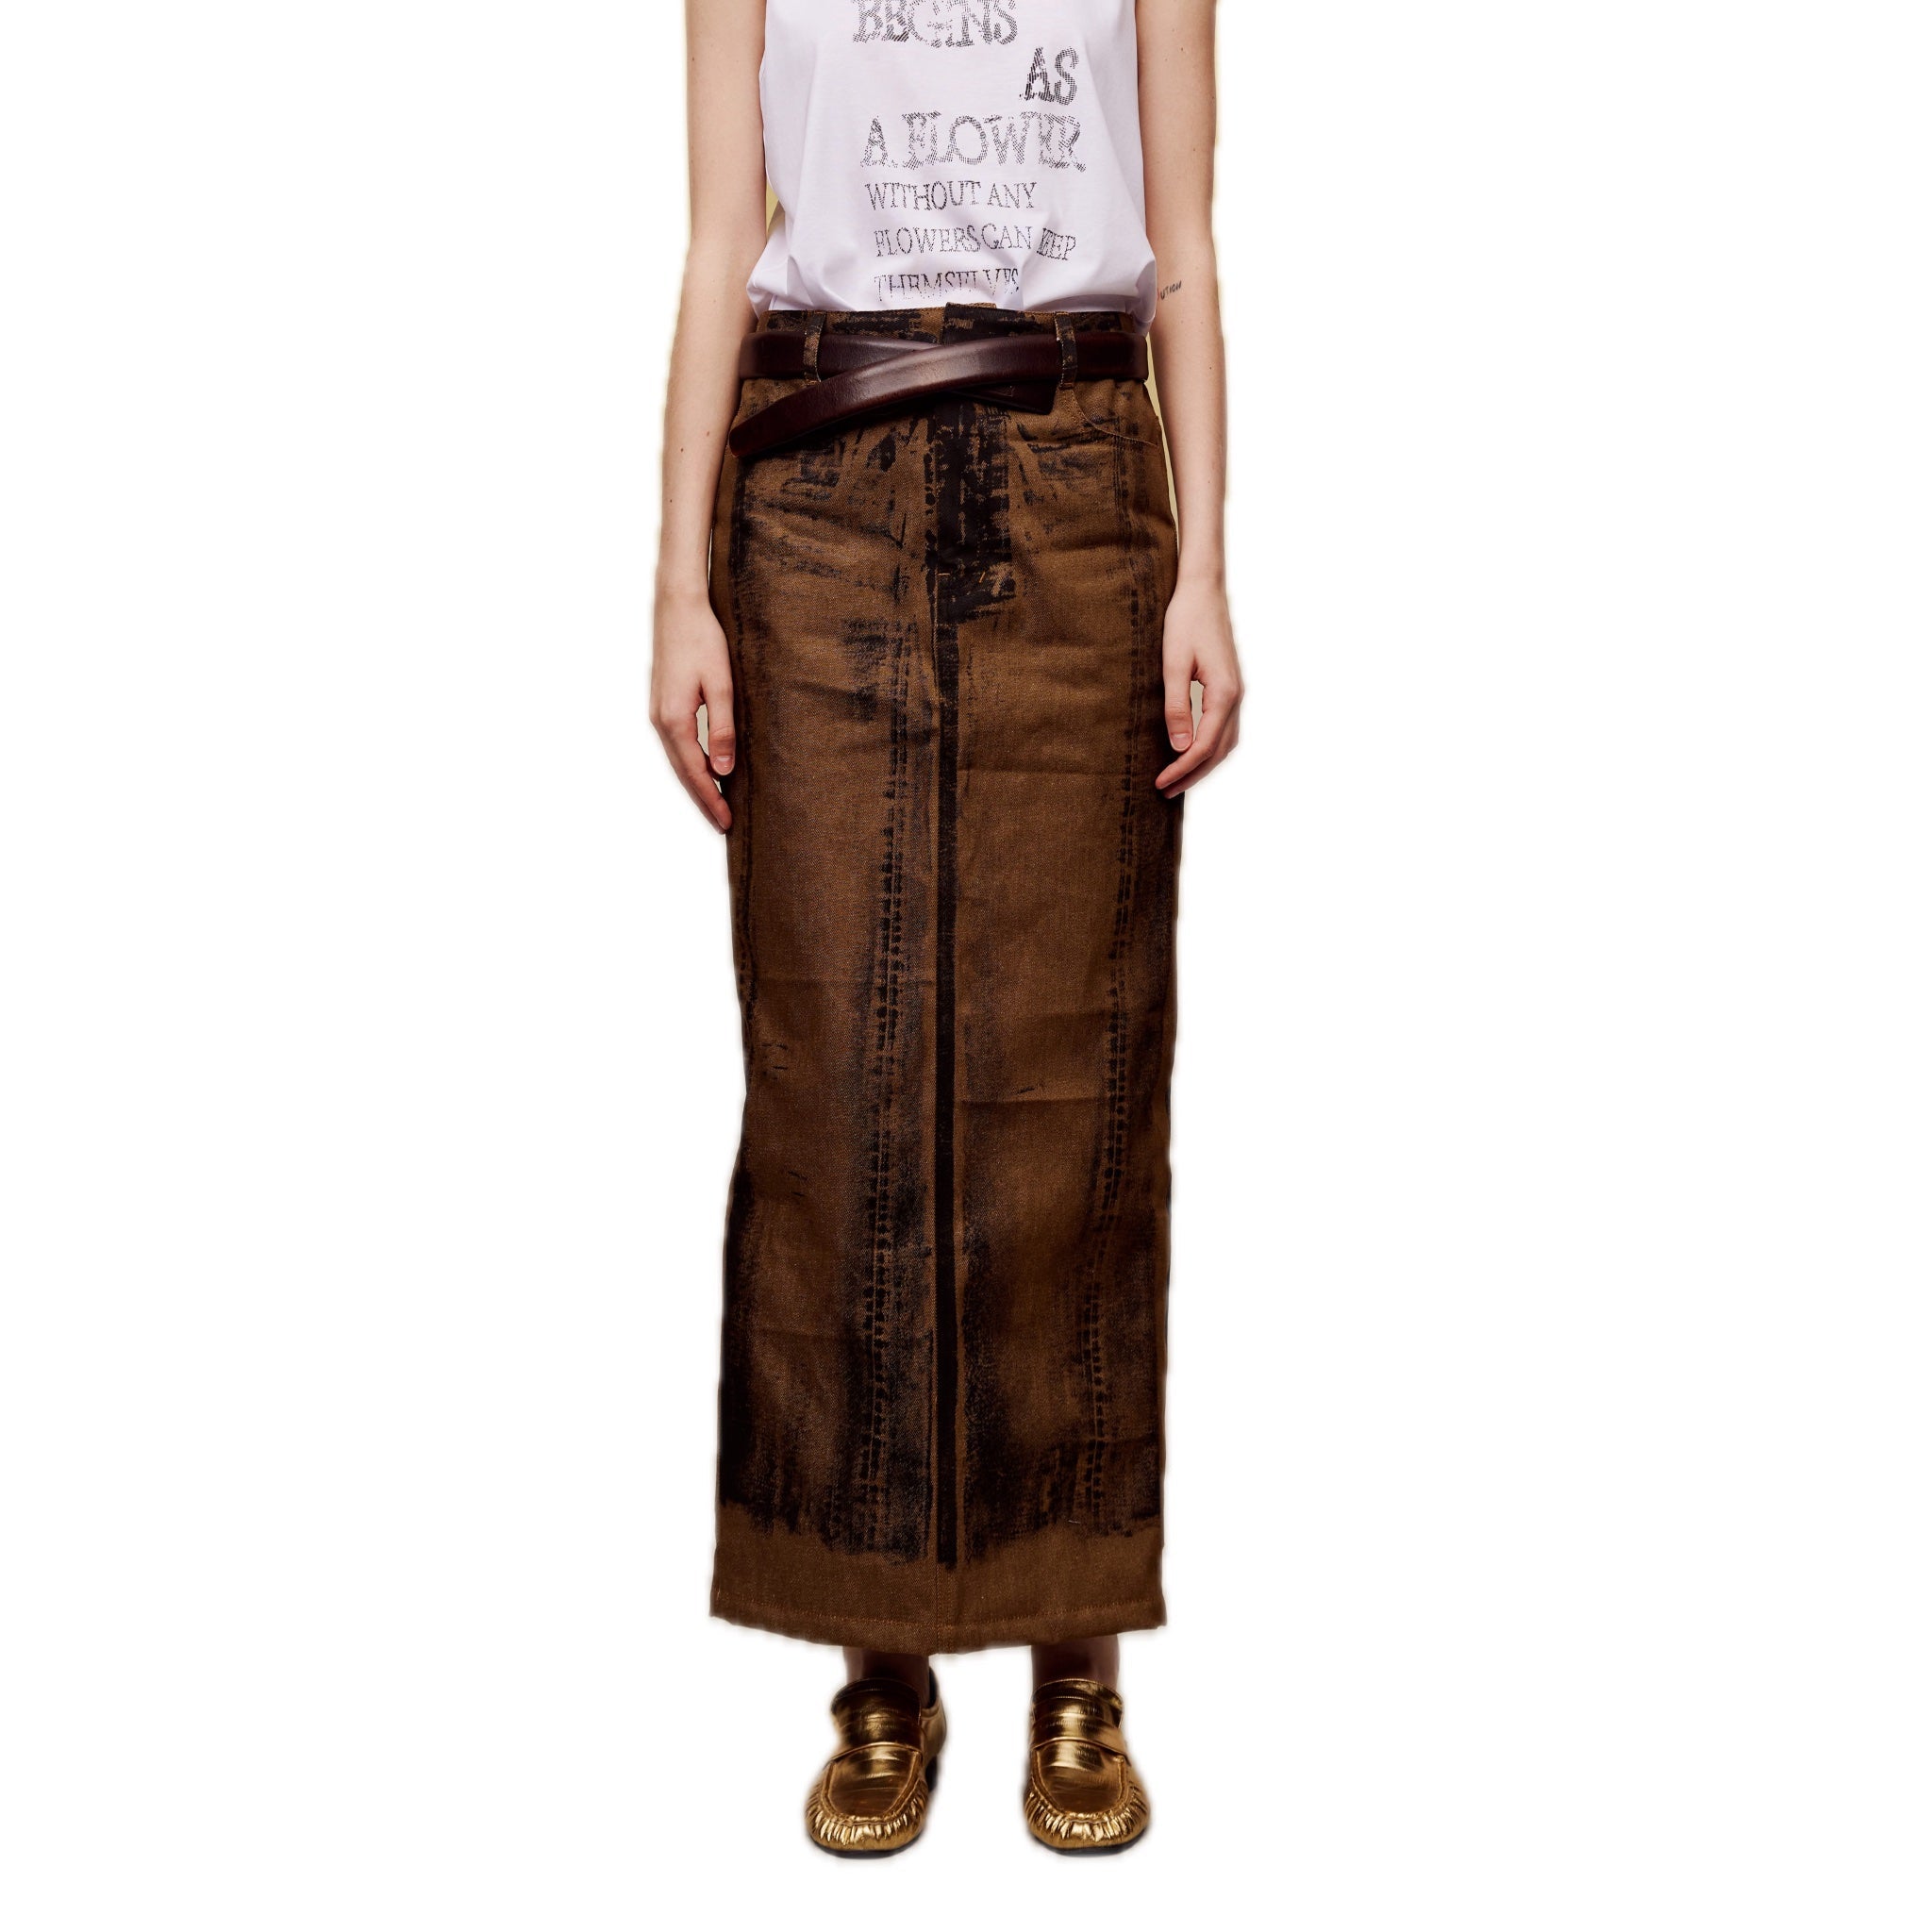 ilEWUOY Off-set Printed Denim Long Skirt in Brown | MADA IN CHINA